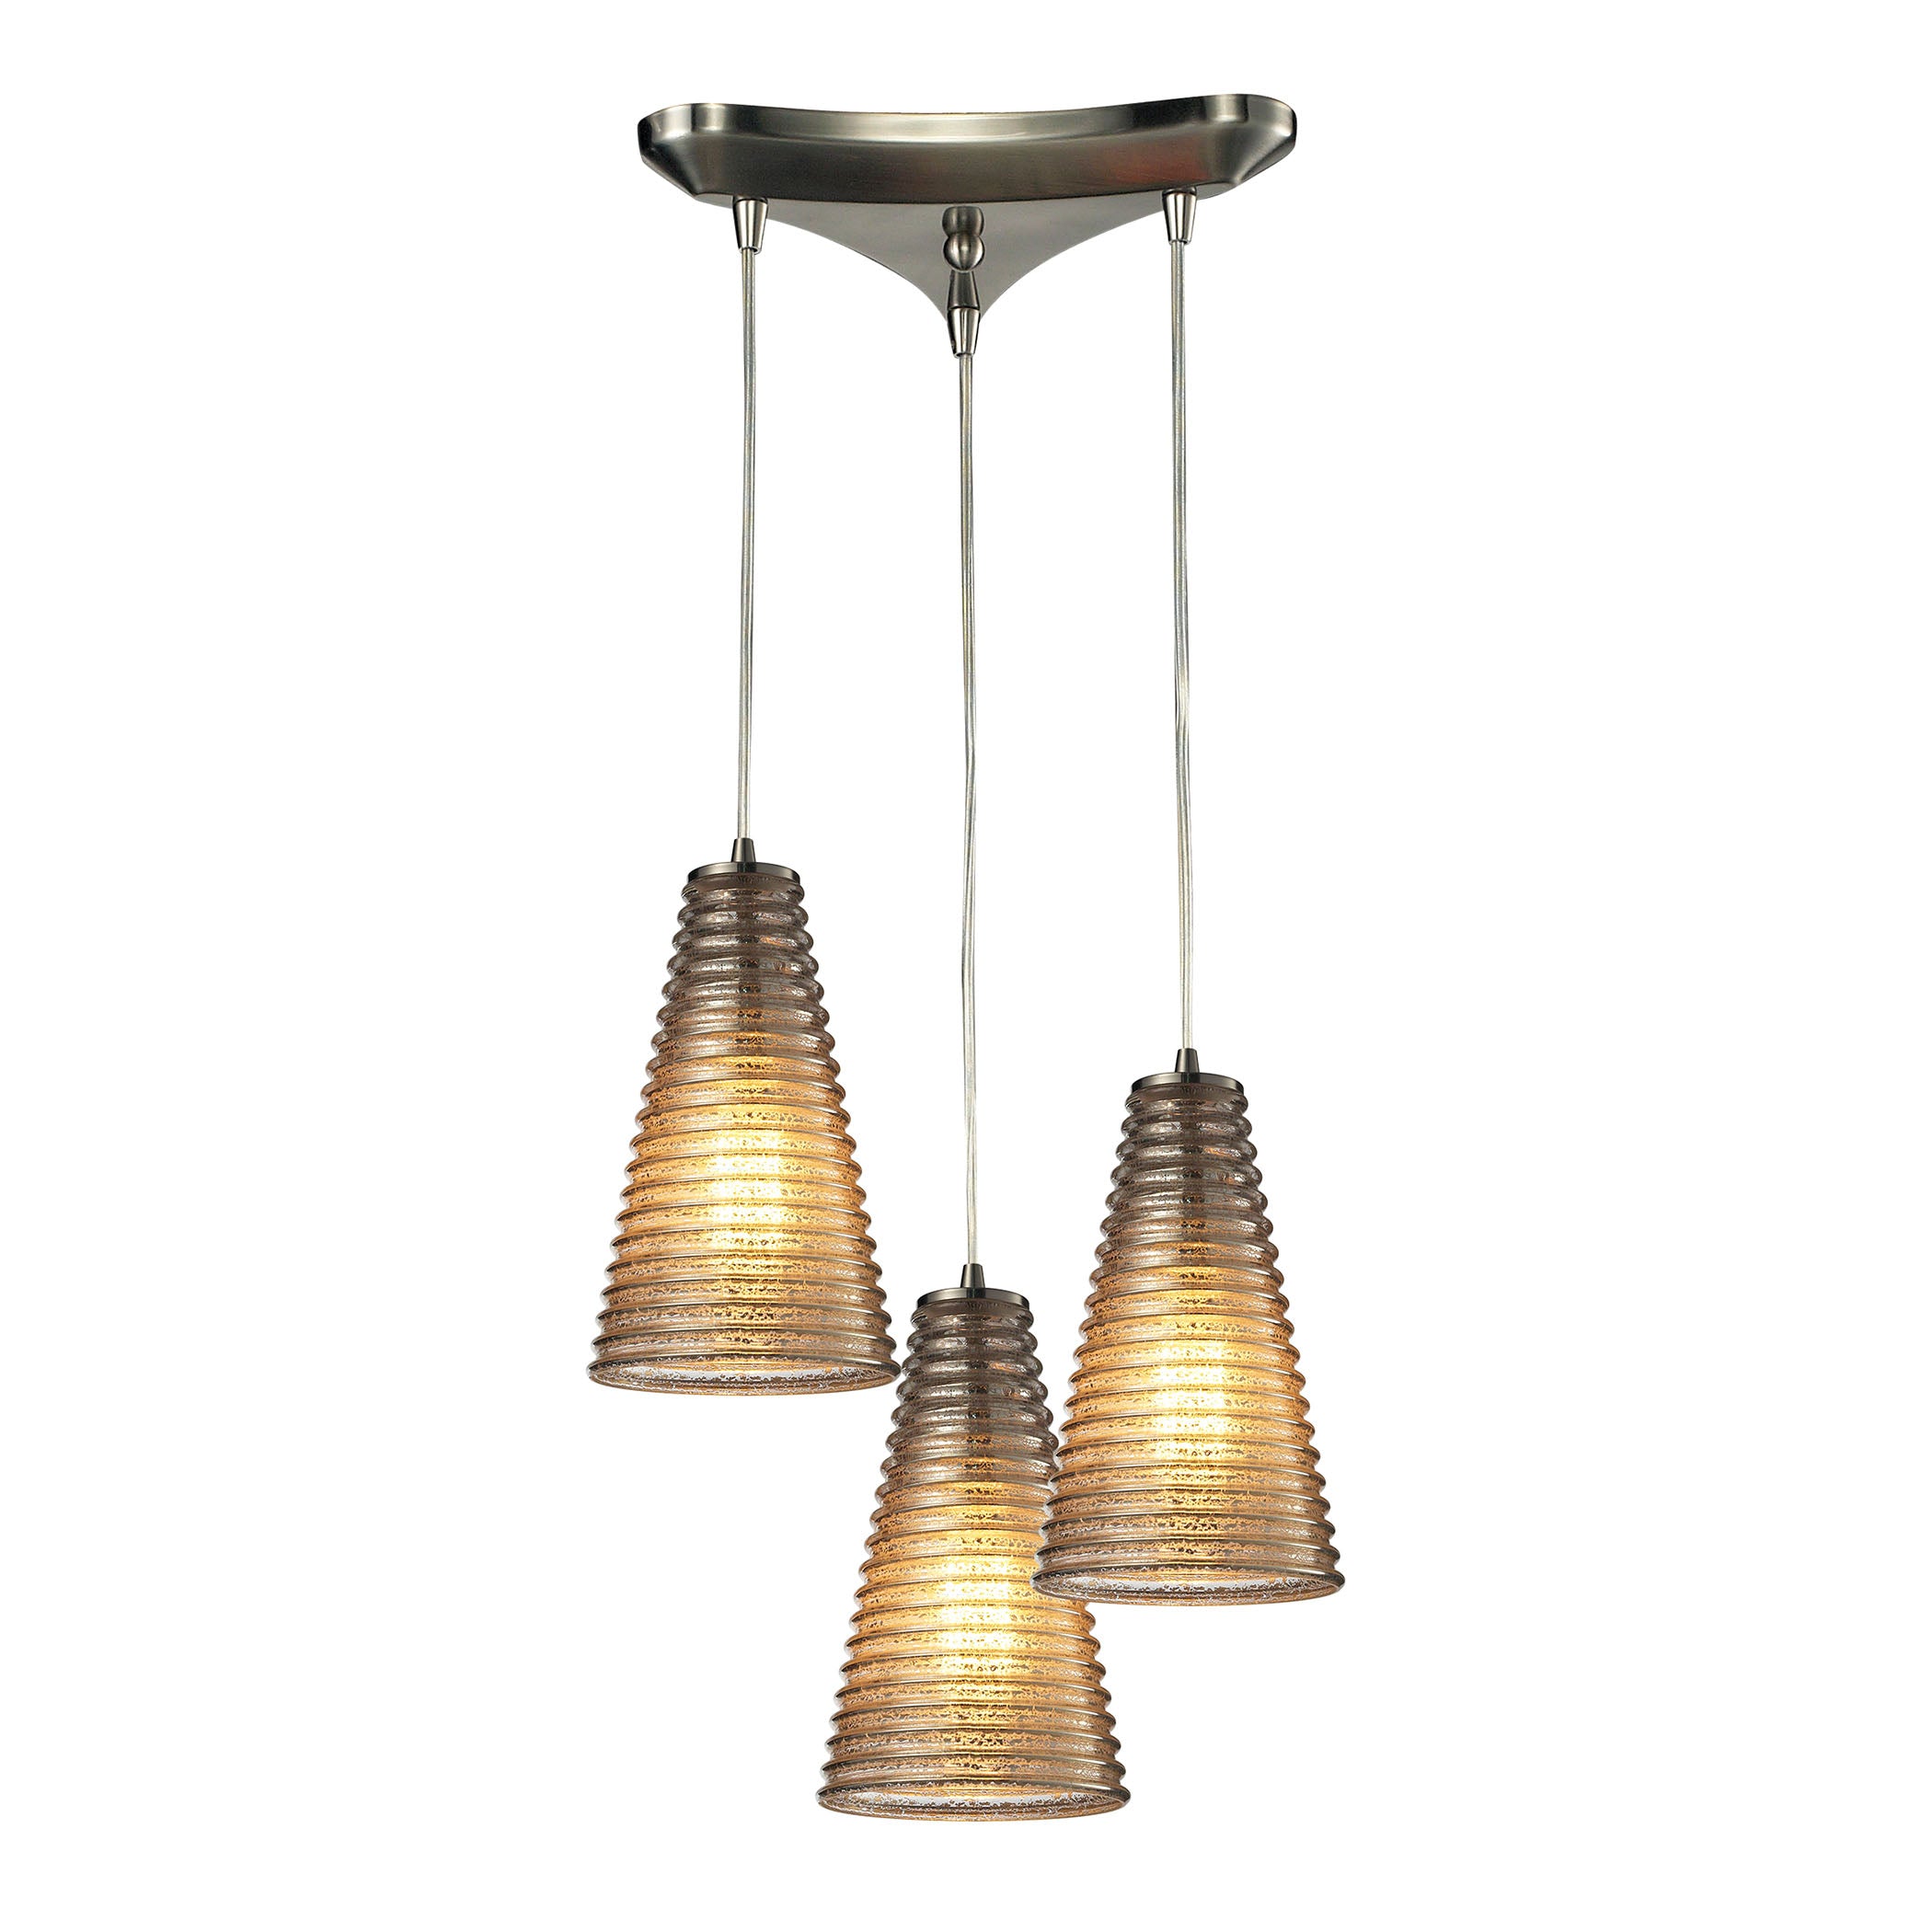 ELK Lighting 10333/3 Ribbed Glass 3-Light Triangular Pendant Fixture in Satin Nickel with Amber Ribbed Glass